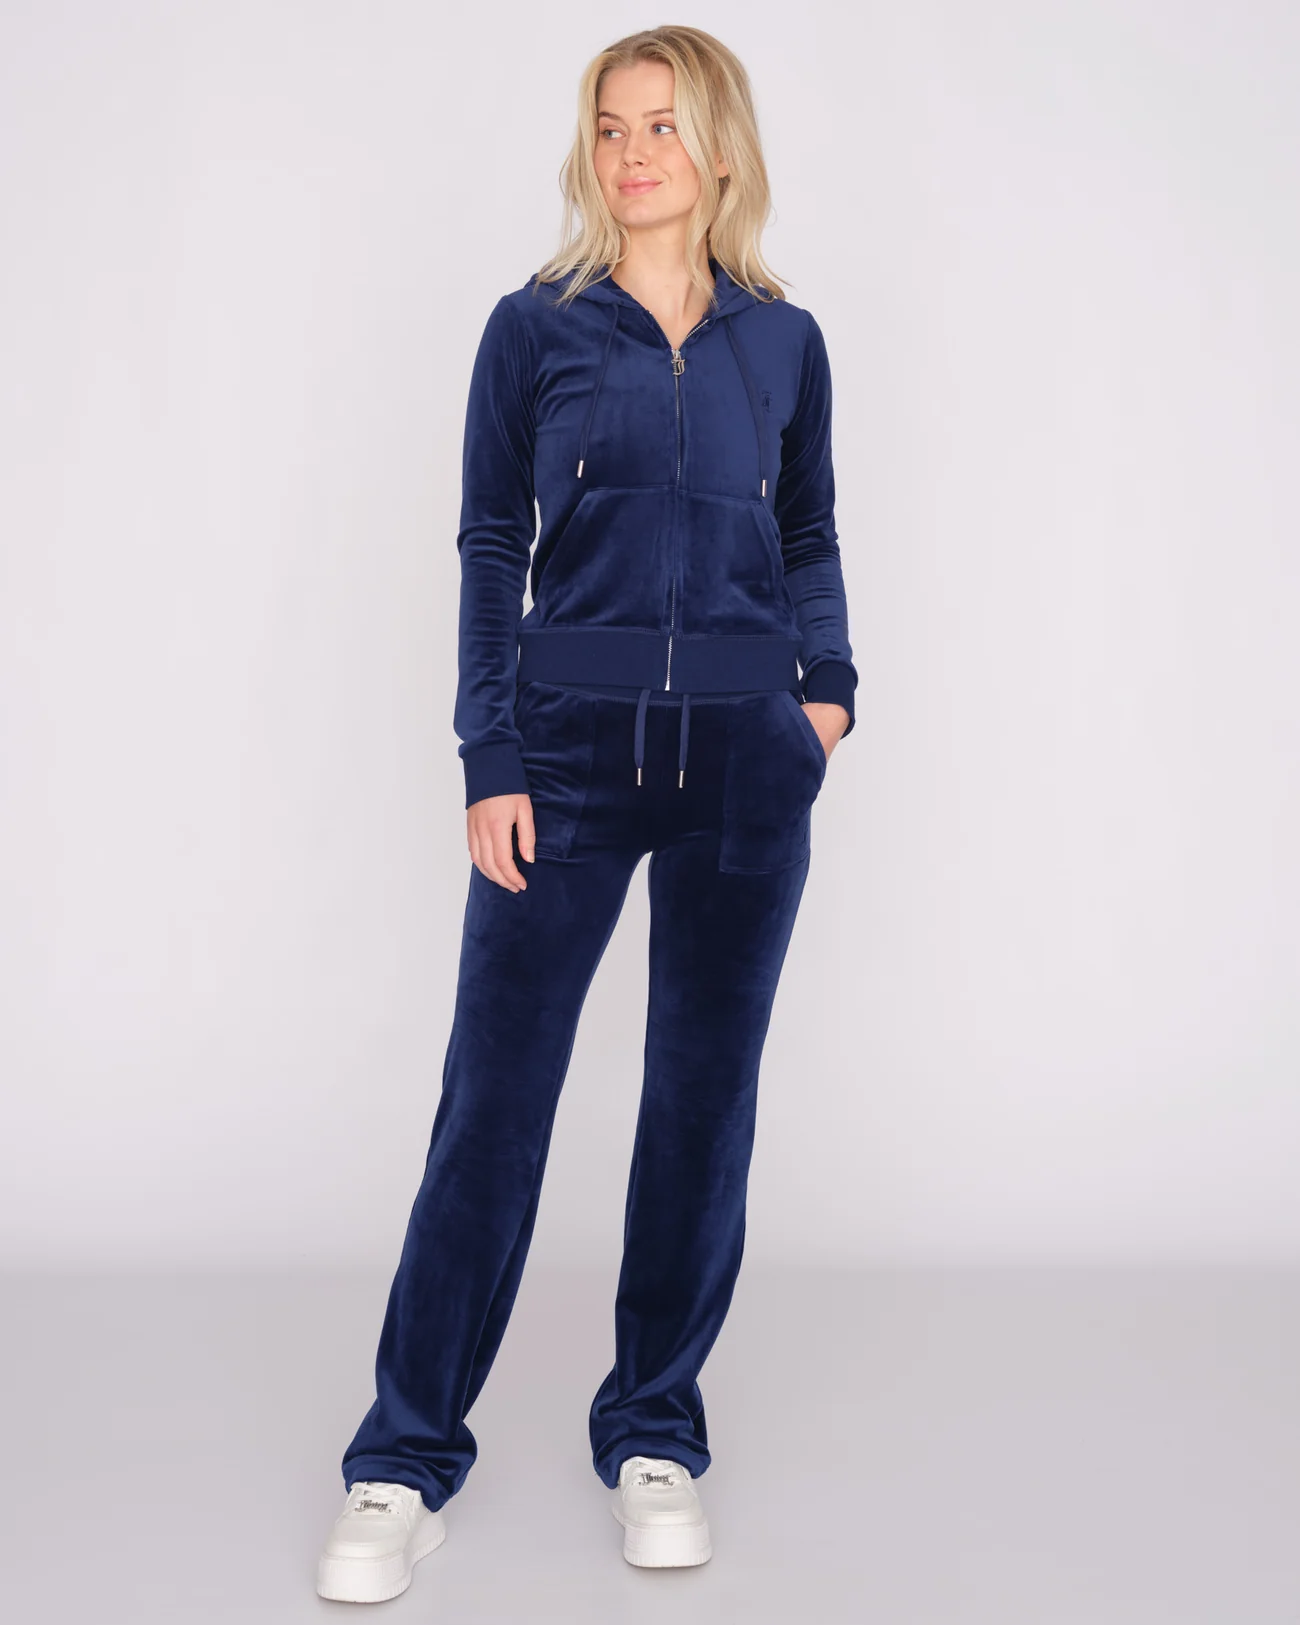 Juicy Couture - Classic Velour Del Ray Pant Blue Depths